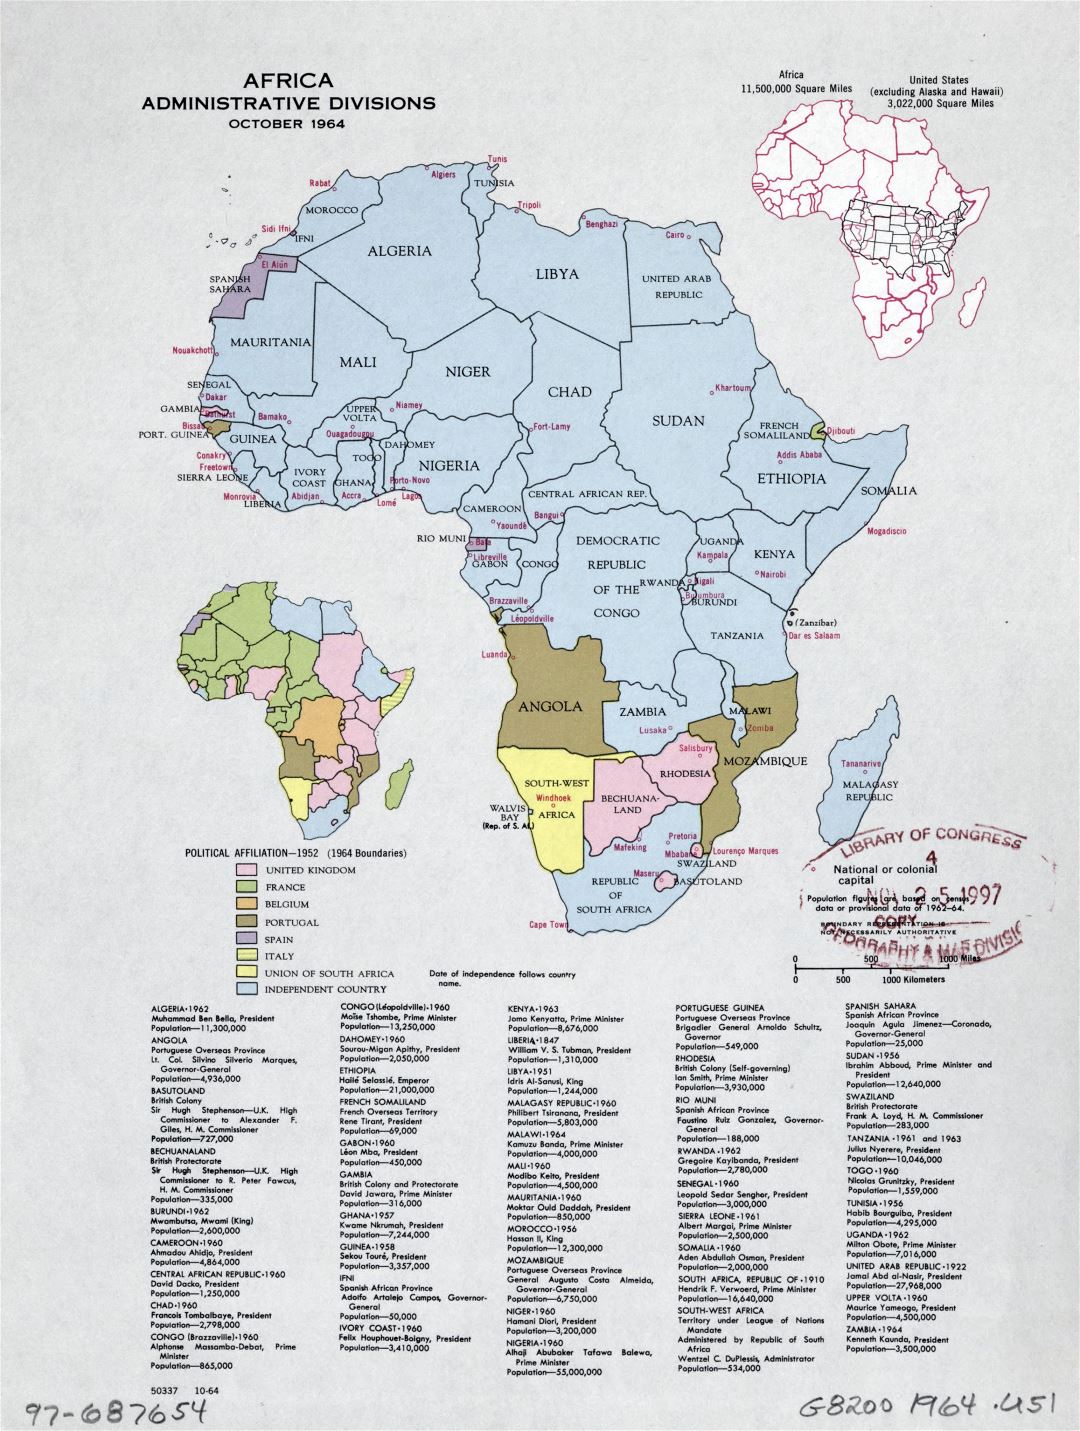 Large detailed administrative divisions map of Africa - October, 1964